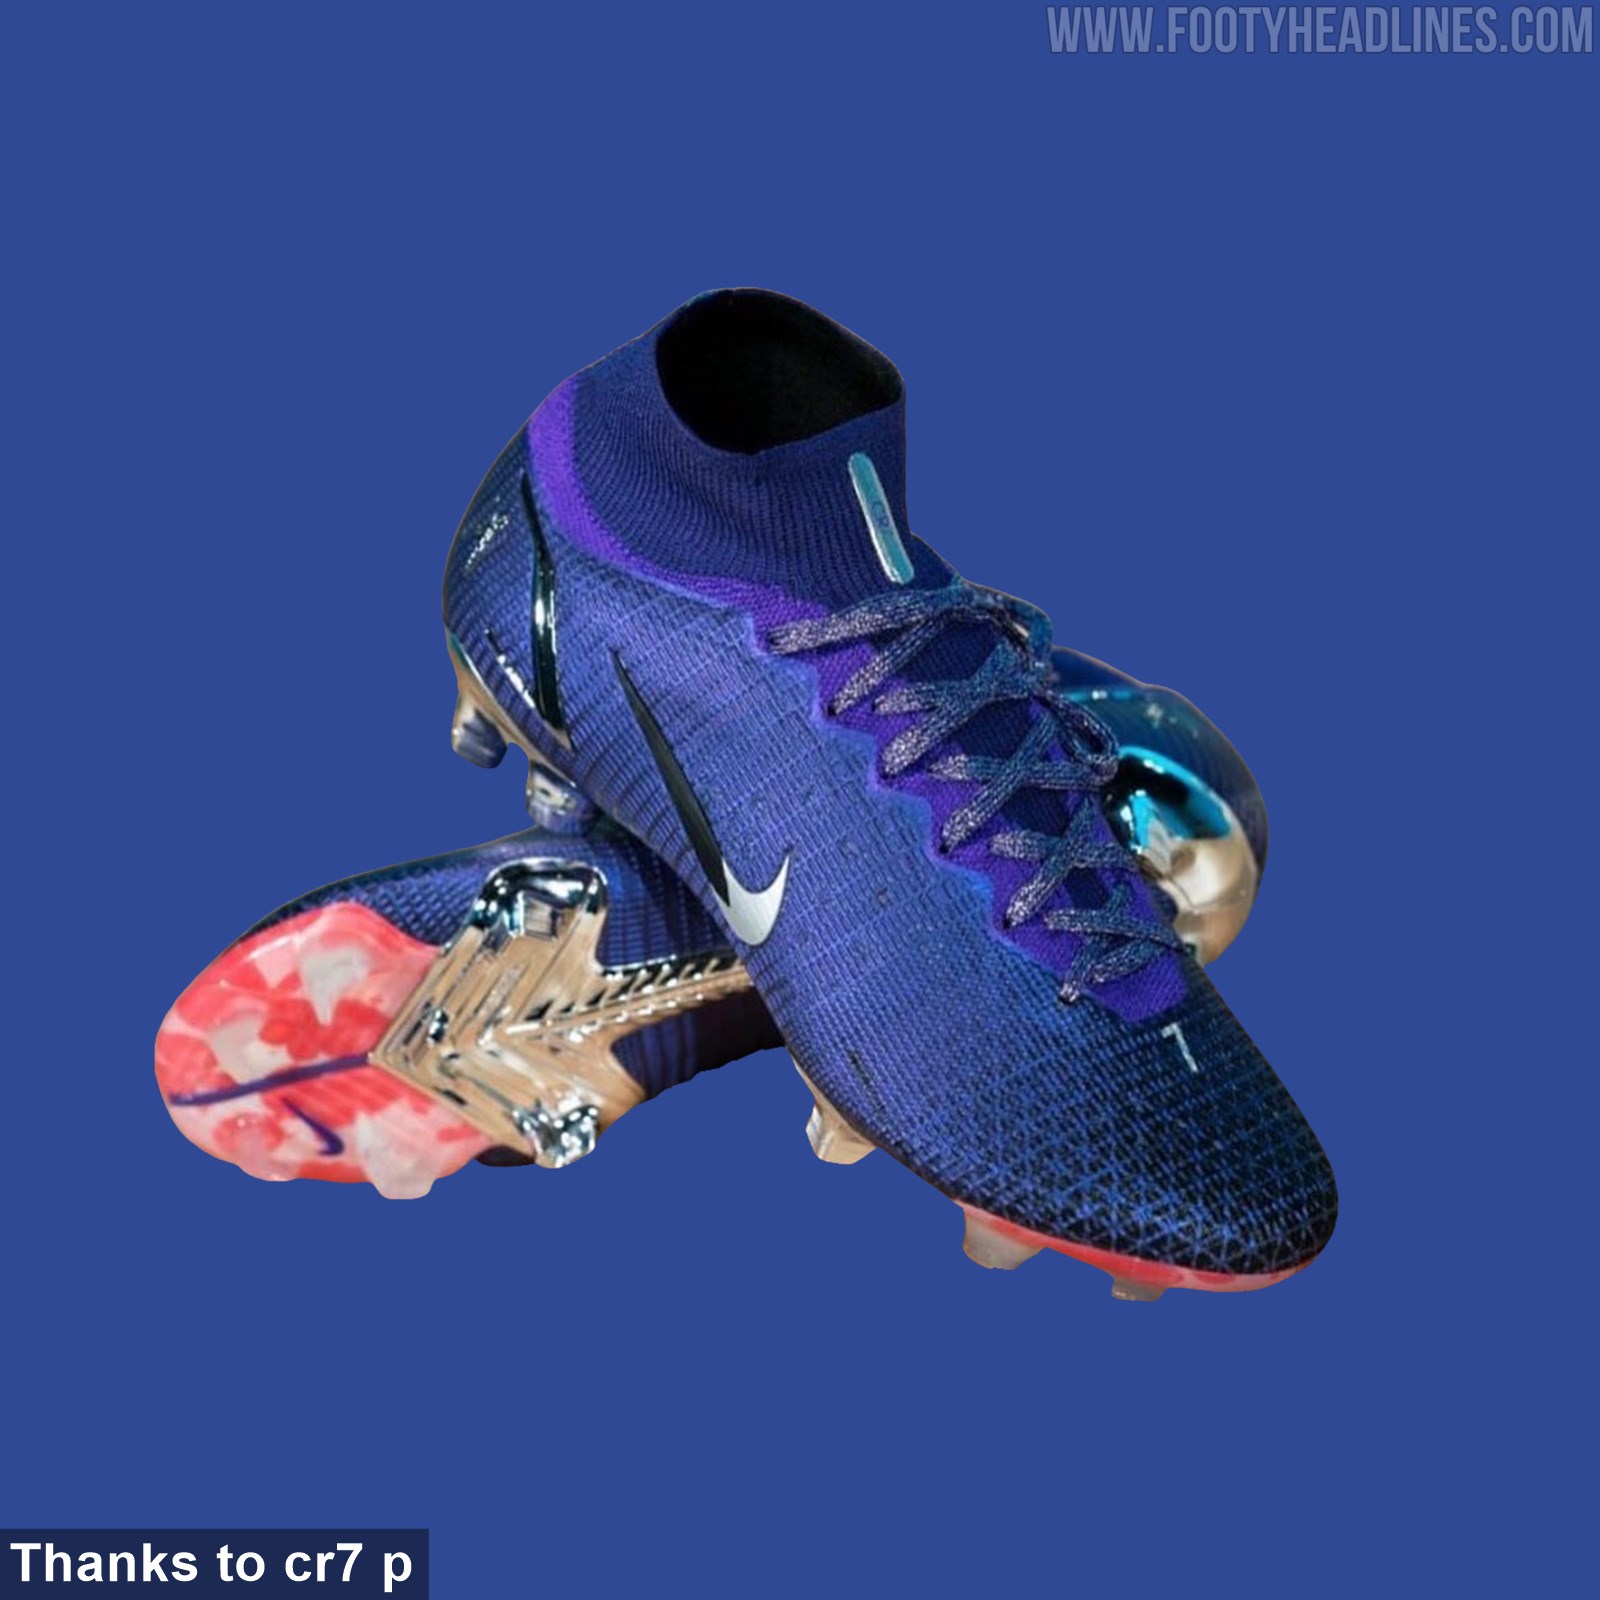 Nike CR7 "Freestyle" 2022 Boots Revealed - Footy Headlines